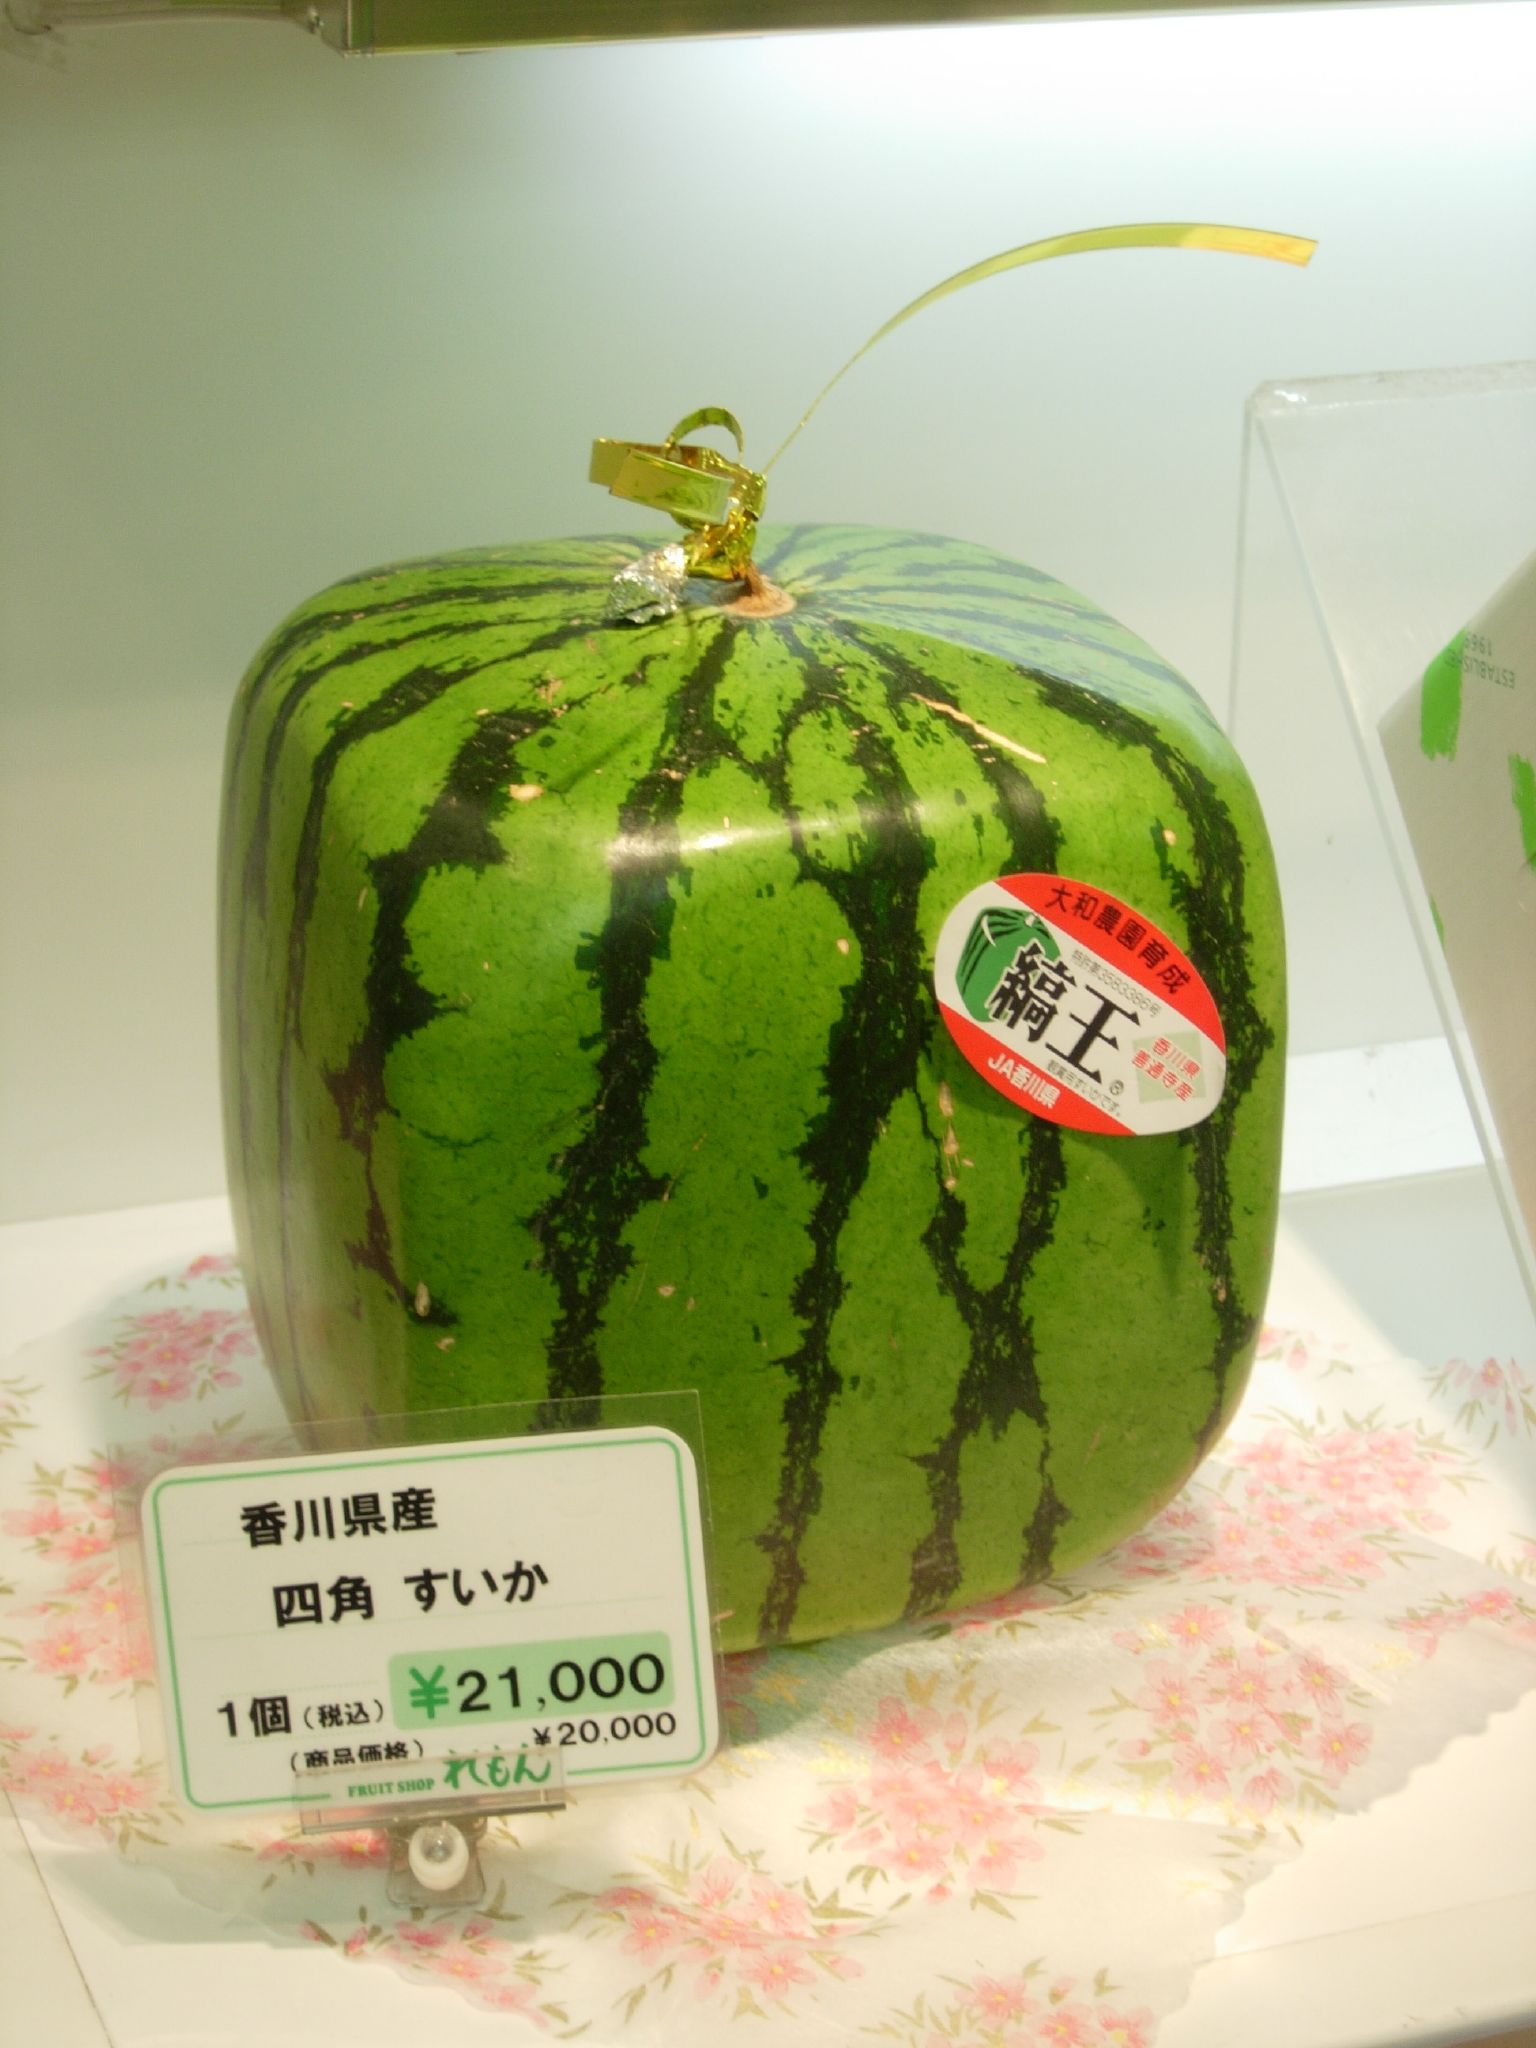 a watermelon and price label in a display